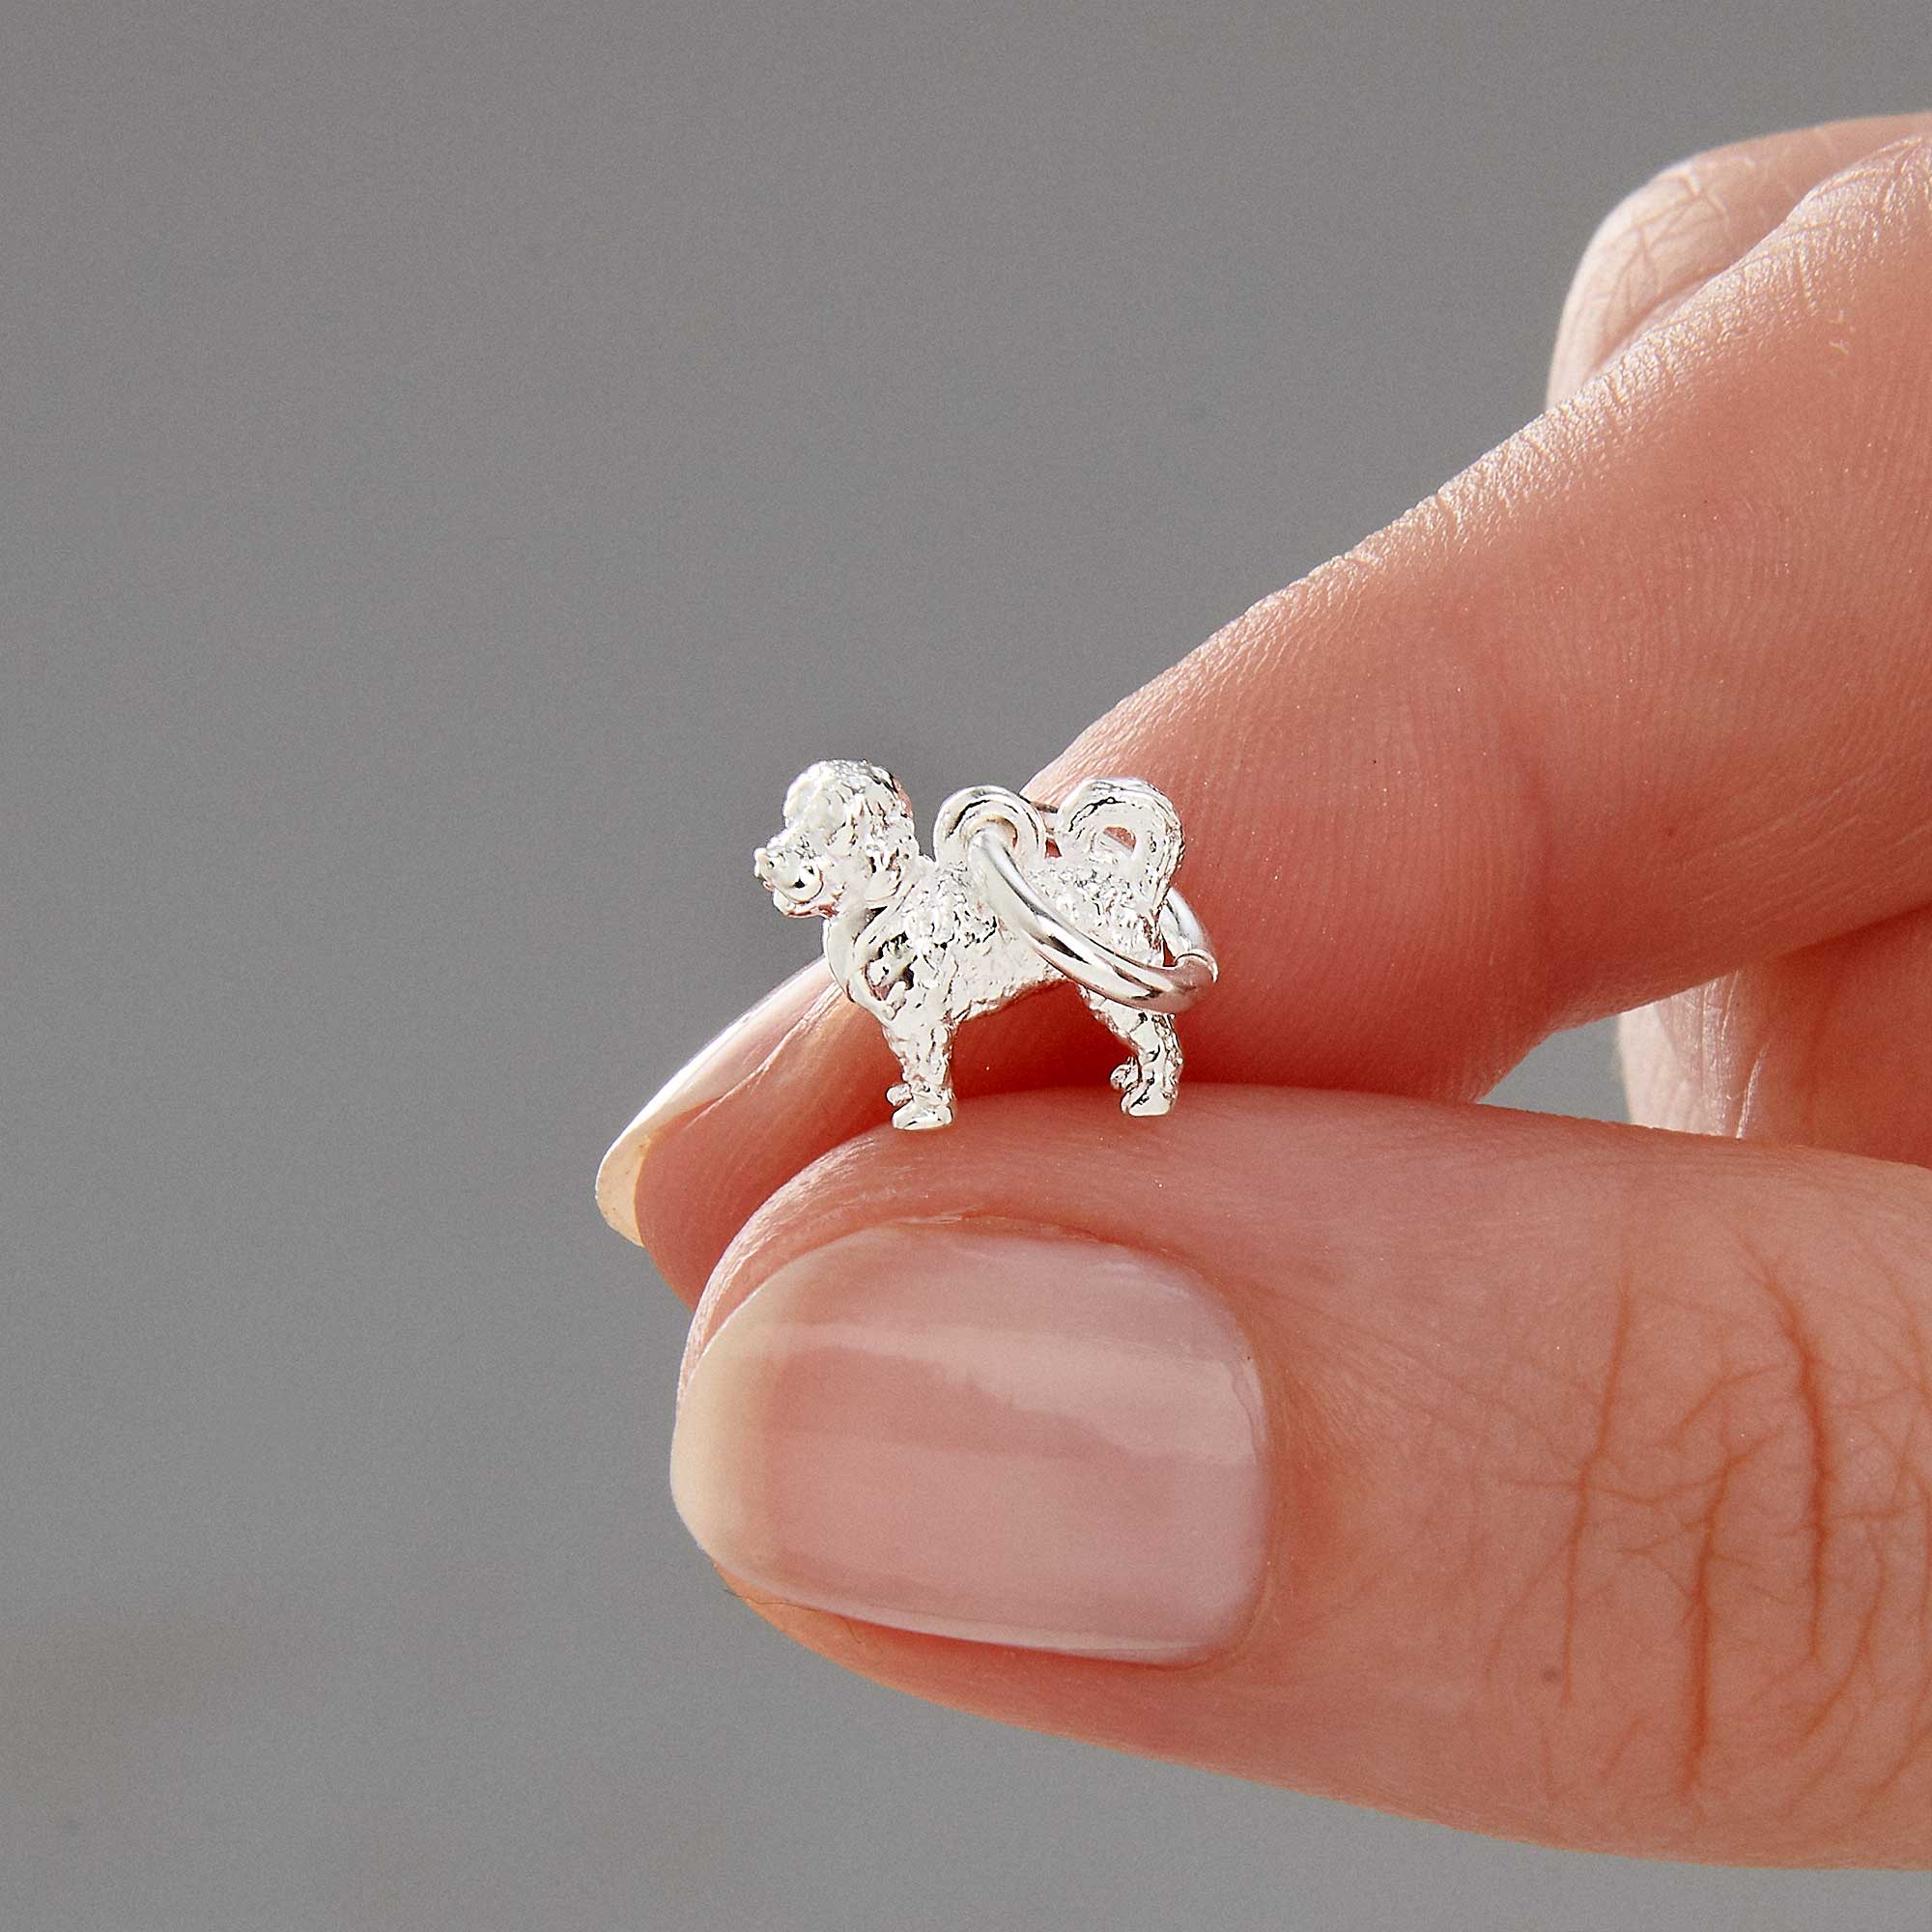 Cavapoo cavoodle spoodle mixed breed dog charm silver with jump ring for bracelet Scarlett Jewellery Ltd